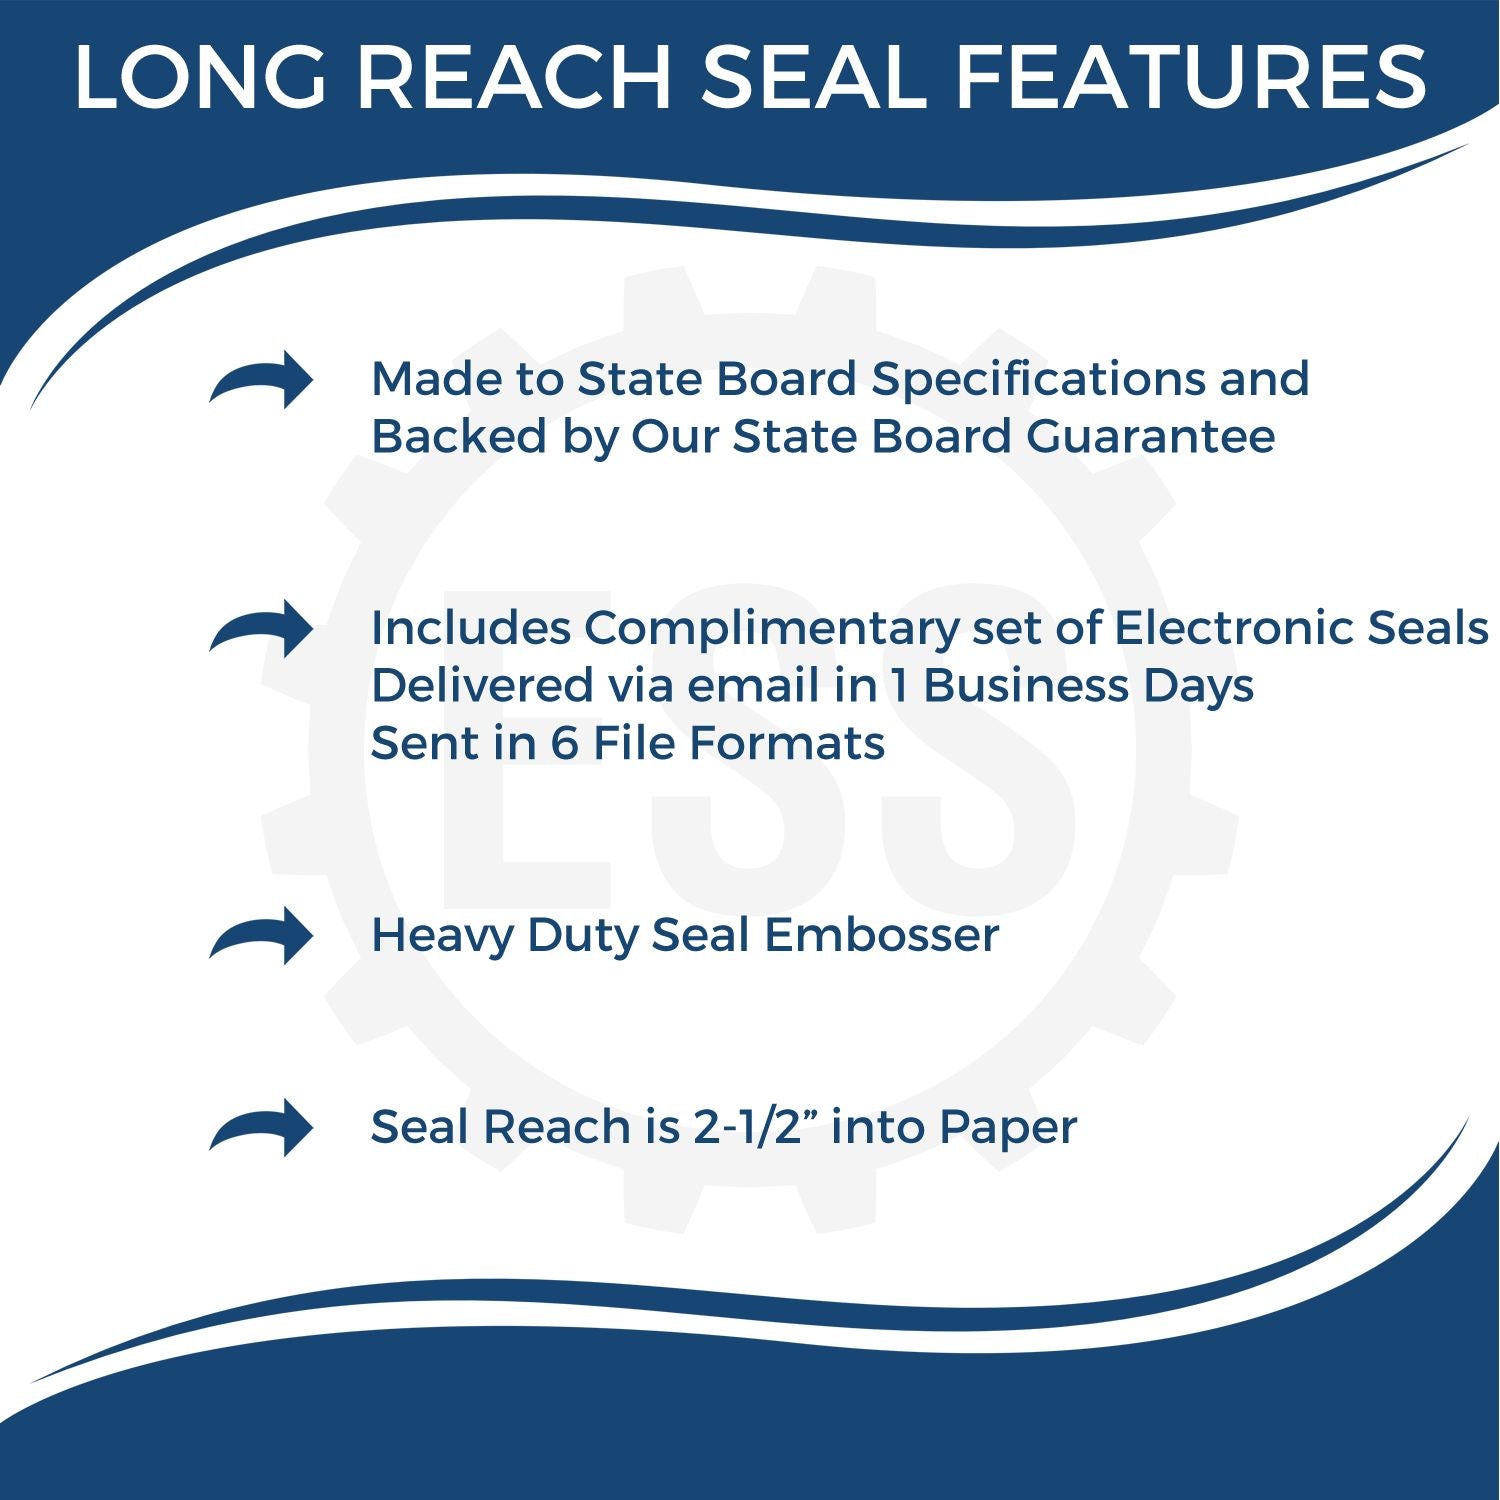 A picture of an infographic highlighting the selling points for the Long Reach Maryland Land Surveyor Seal